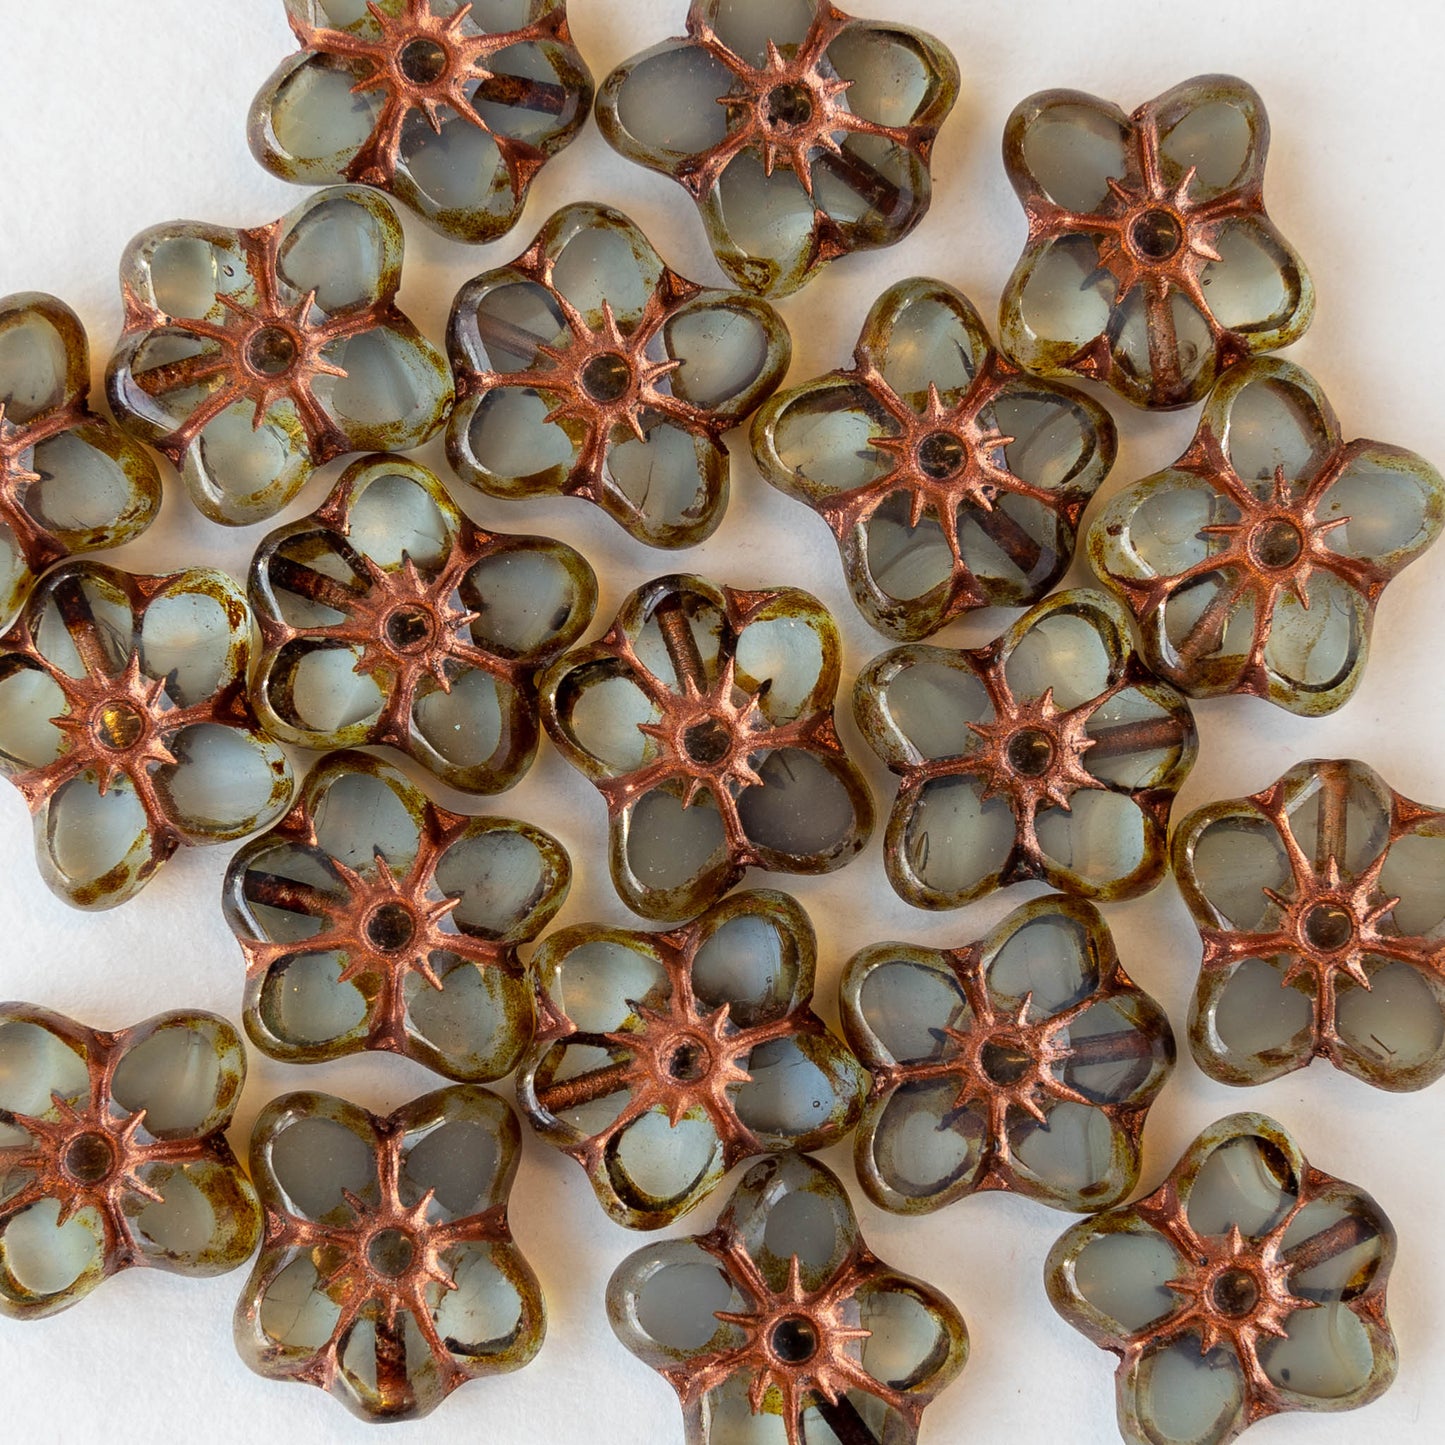 12x14mm Glass Table Cut Flower Beads - Smokey Green glass with a Copper Finish - 10 or 40